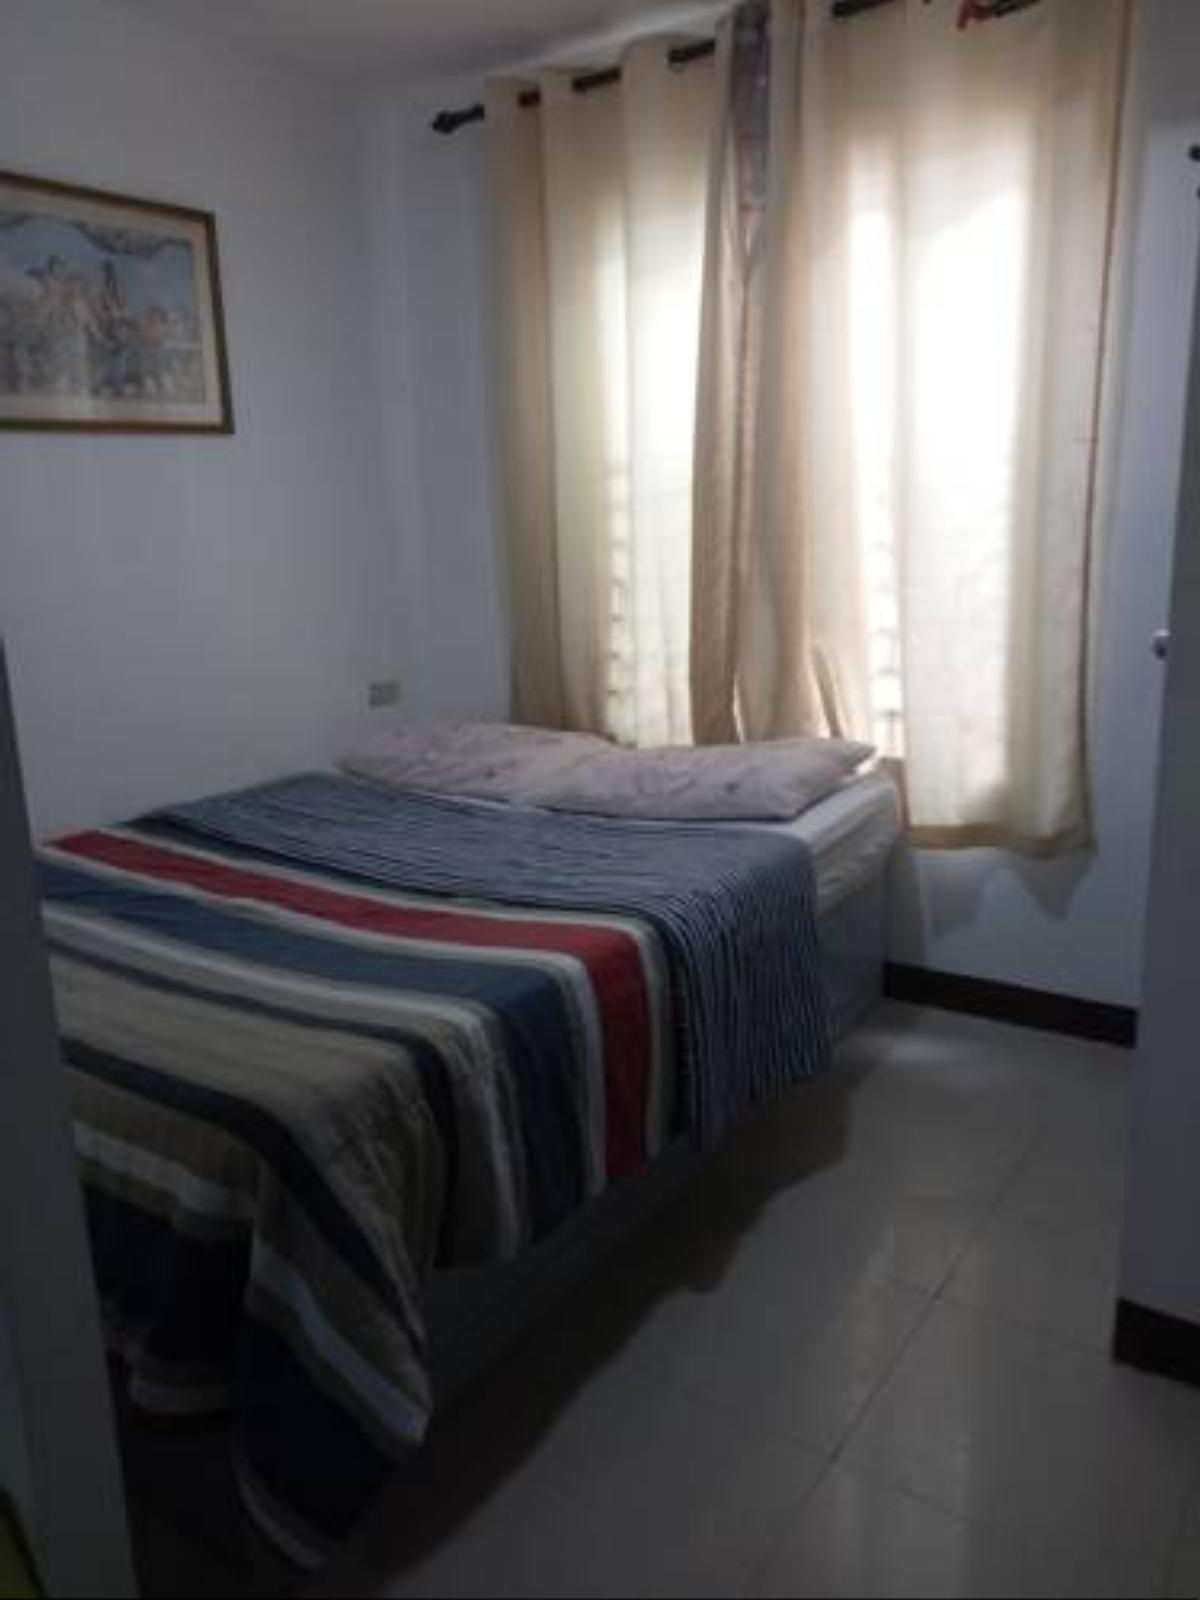 Condo unit affordable accessible place